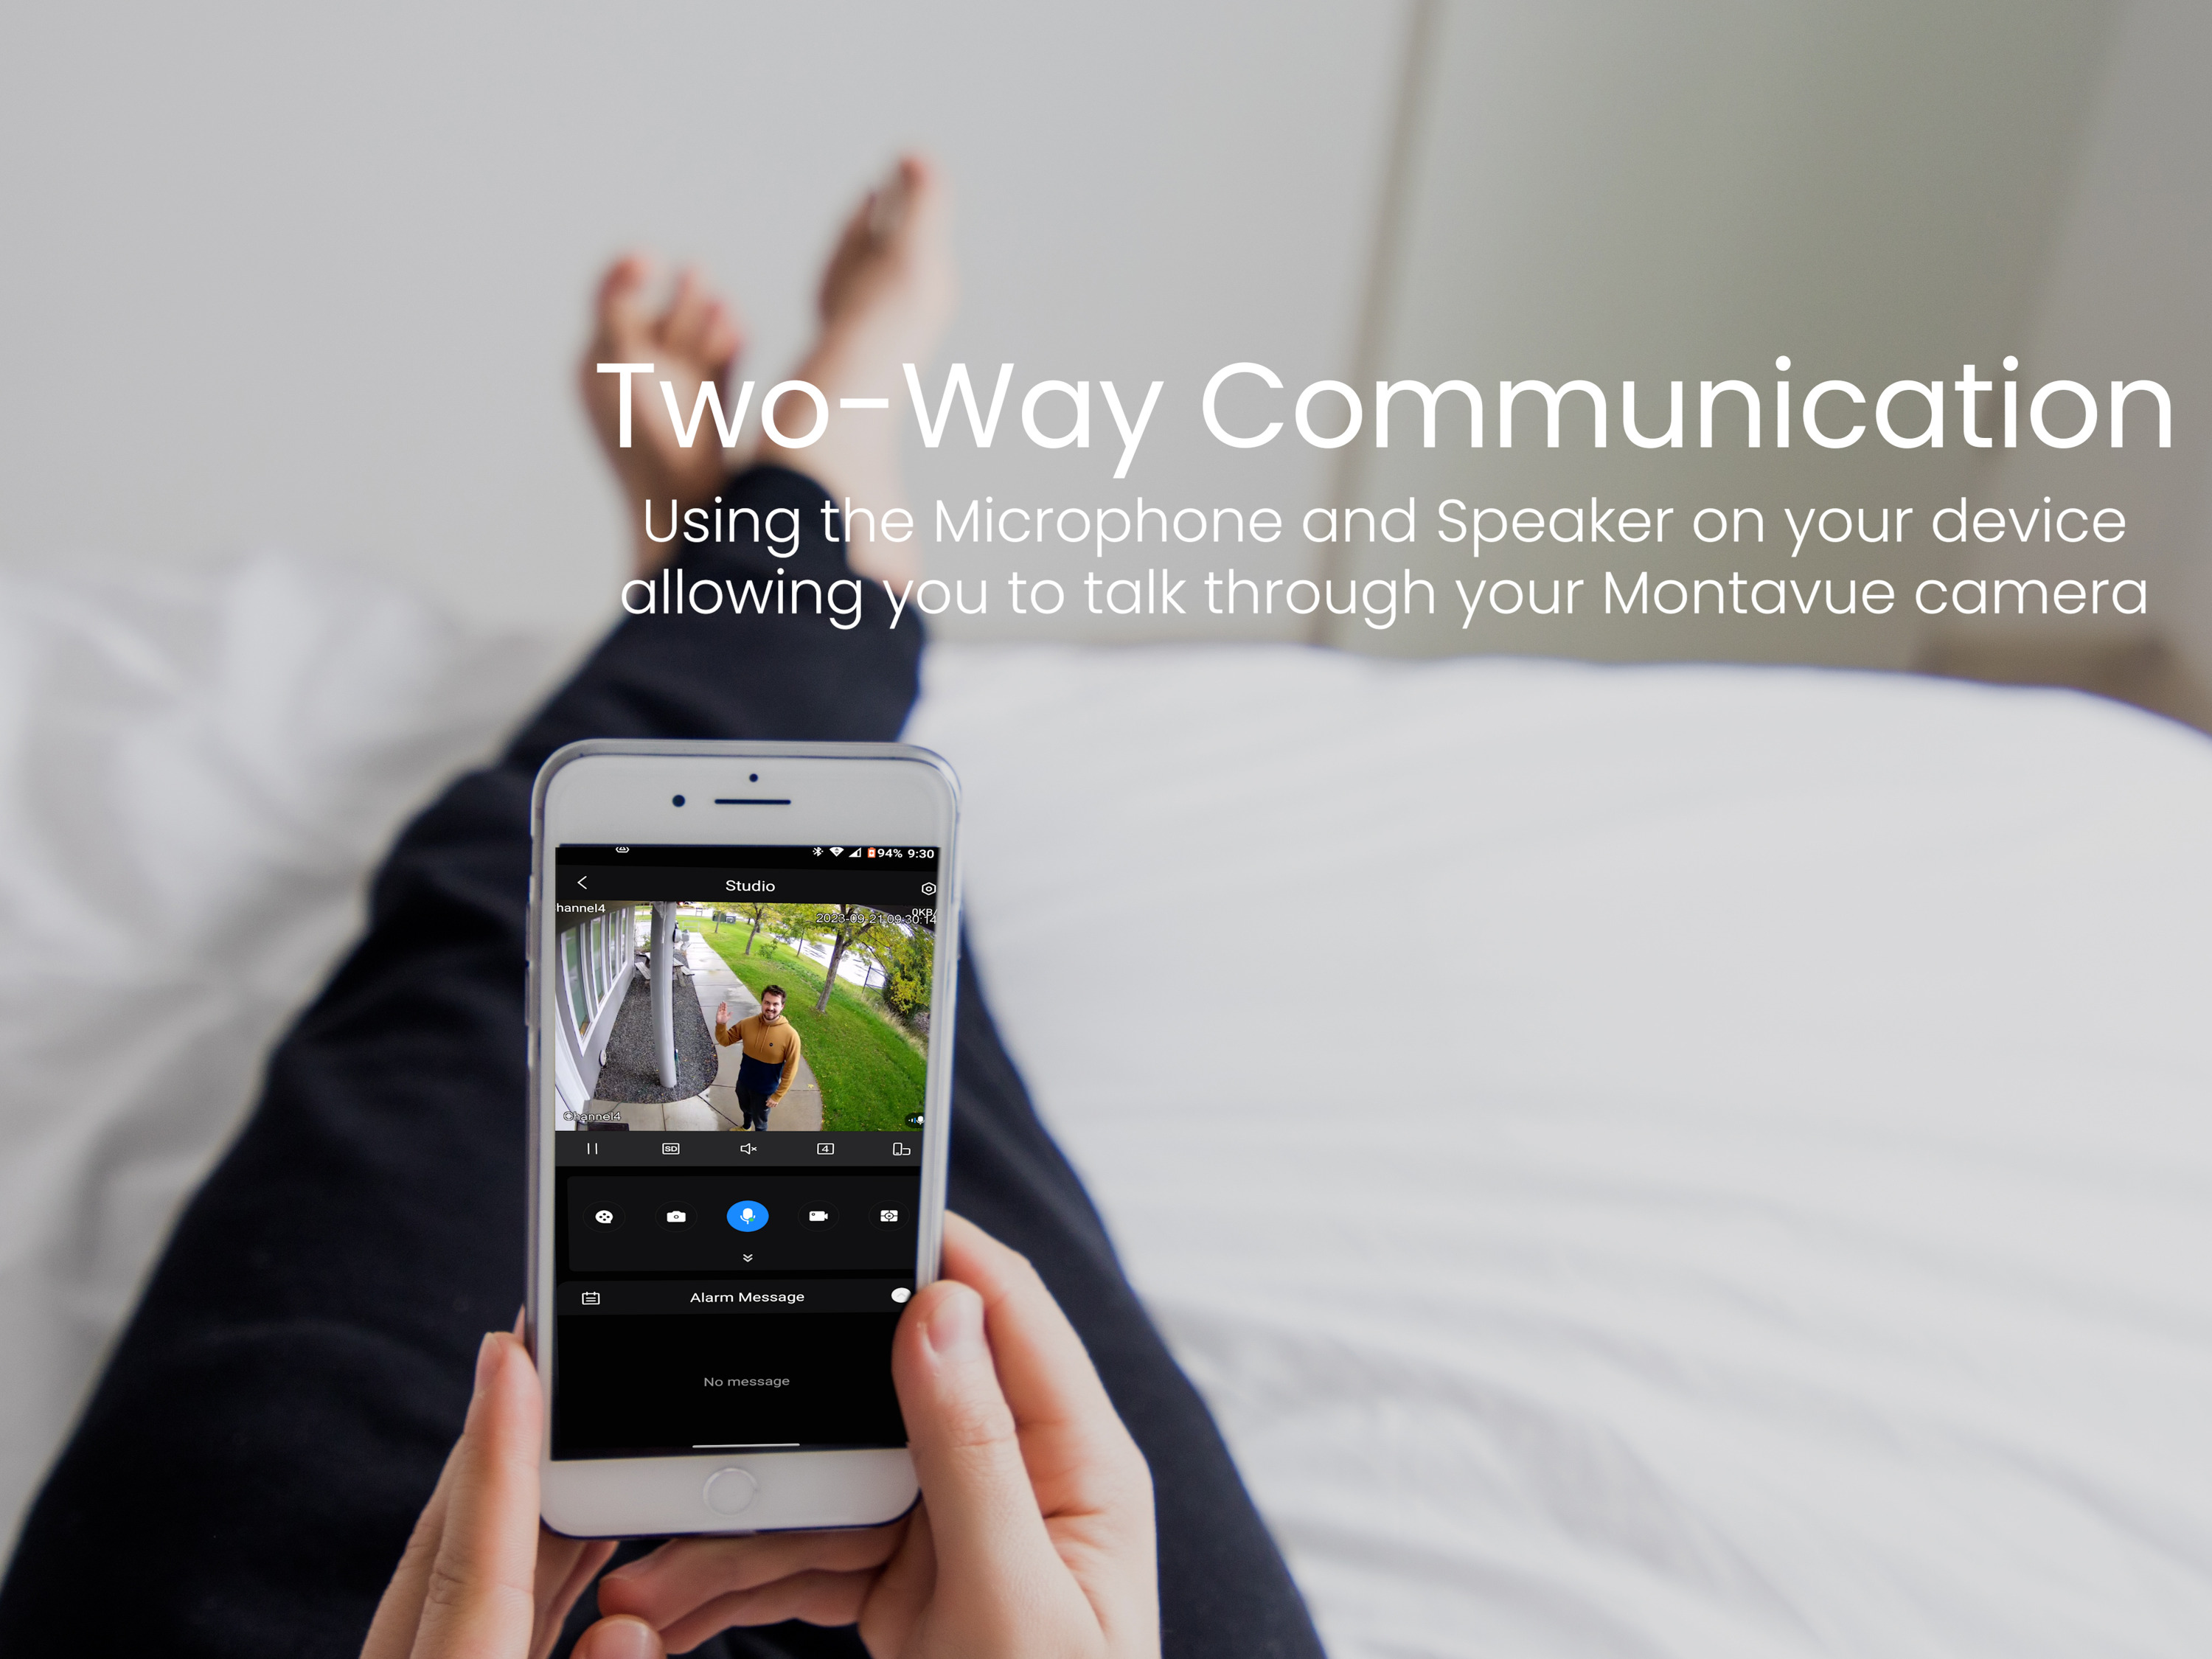 Use your phone to communicate remotely with people near the camera